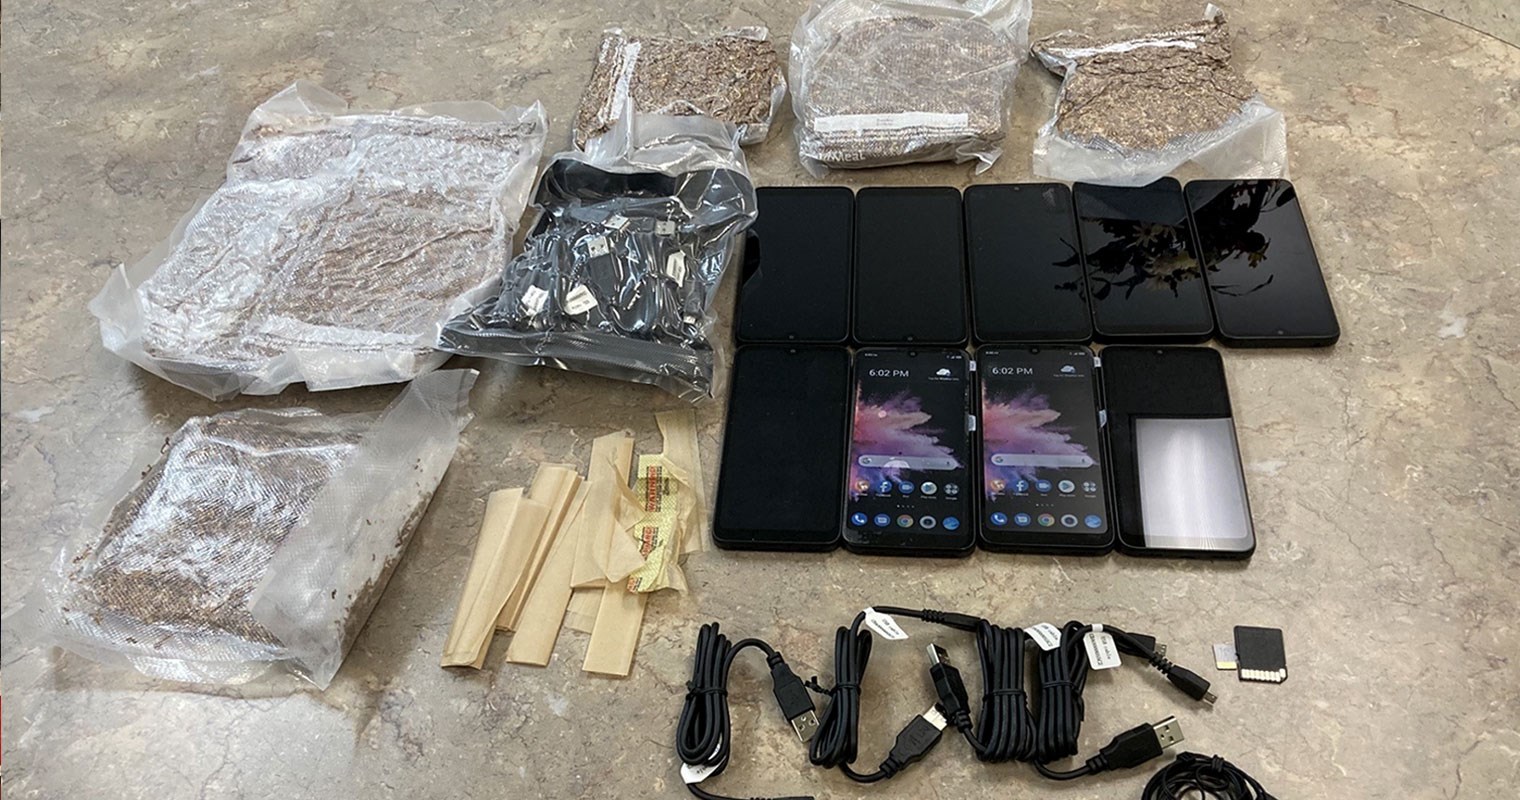 Contraband containing nine cell phones, five packages of tobacco, a package of cell phone charging adapters, two cell phone SIM cards, one pair of earbuds, tobacco wrapping papers and four additional charging cords.